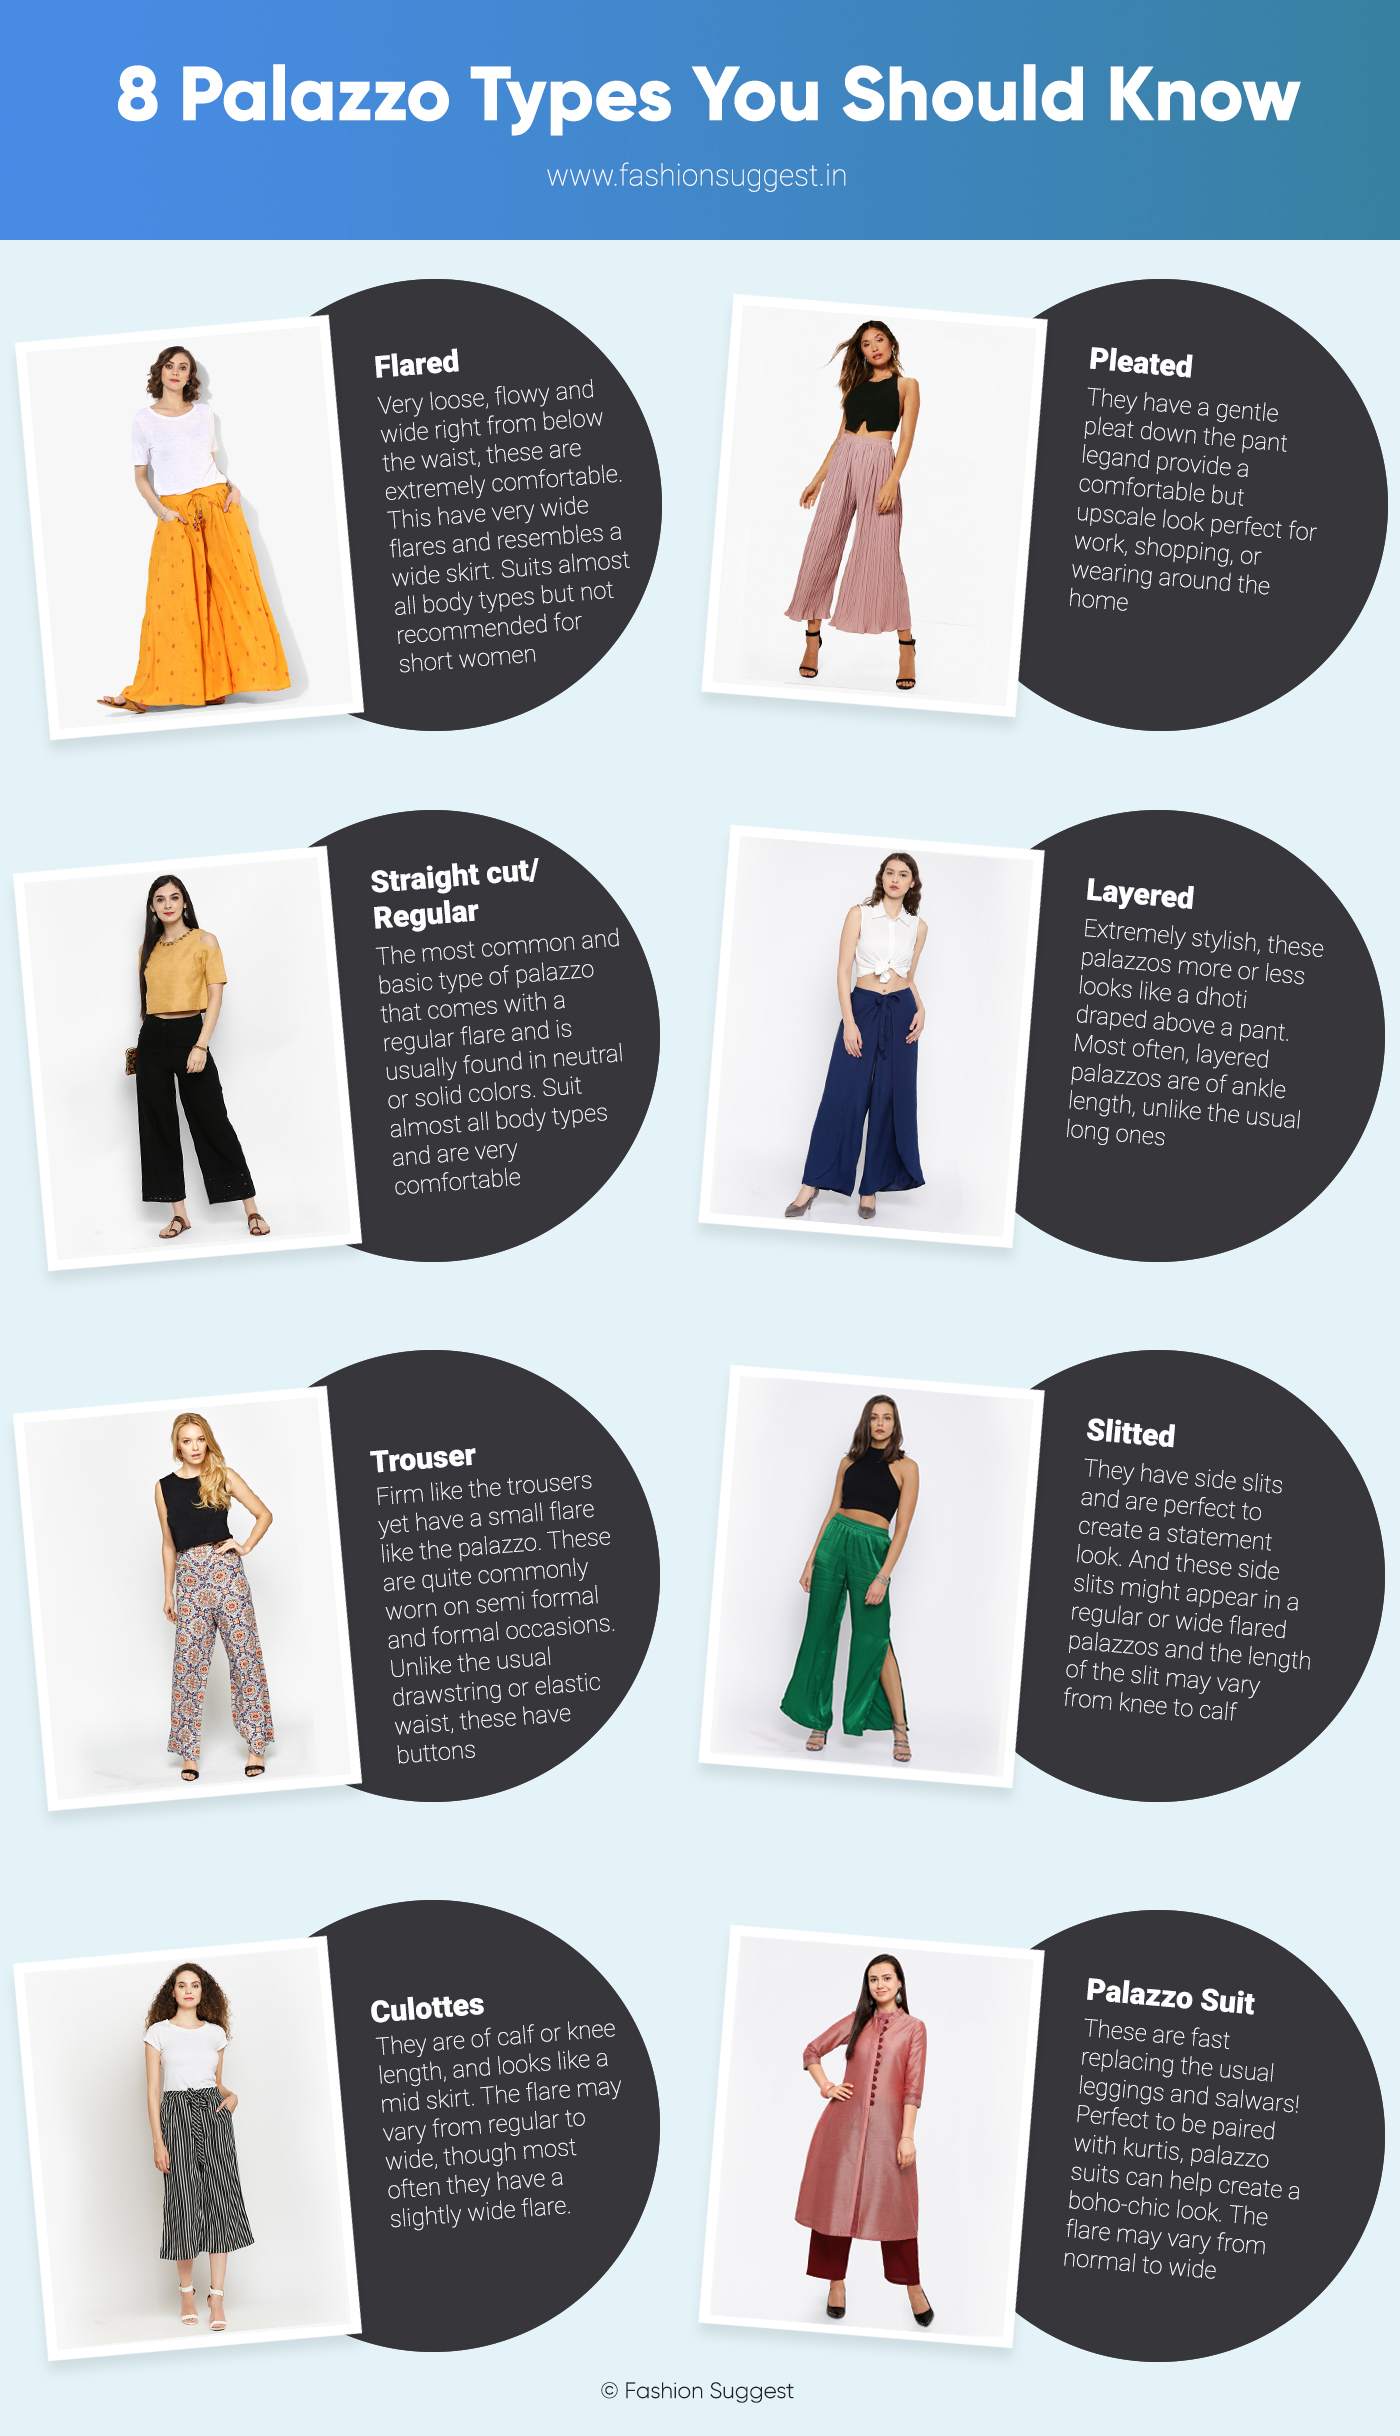 Are culottes and pallazo pants the same? If not, how do they differ? - Quora